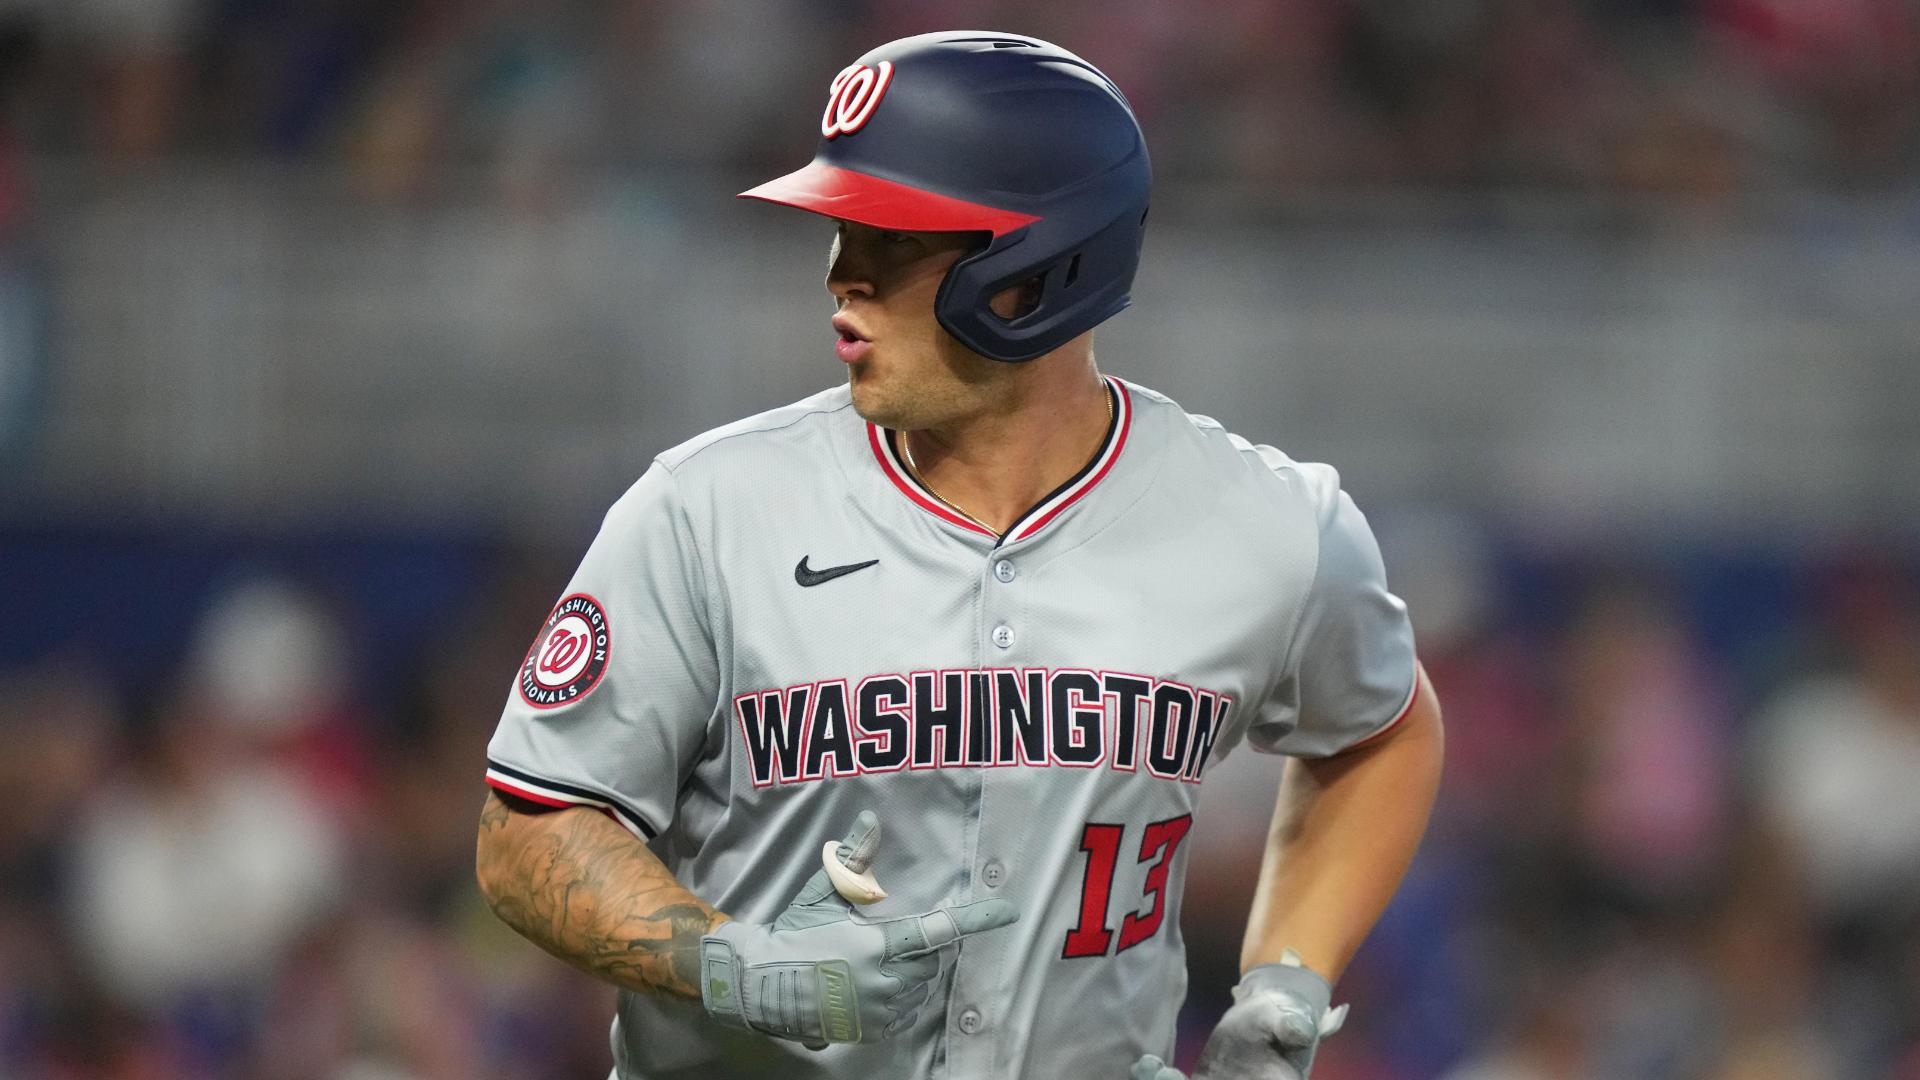 Nationals take 3-game road win streak into game against the Marlins